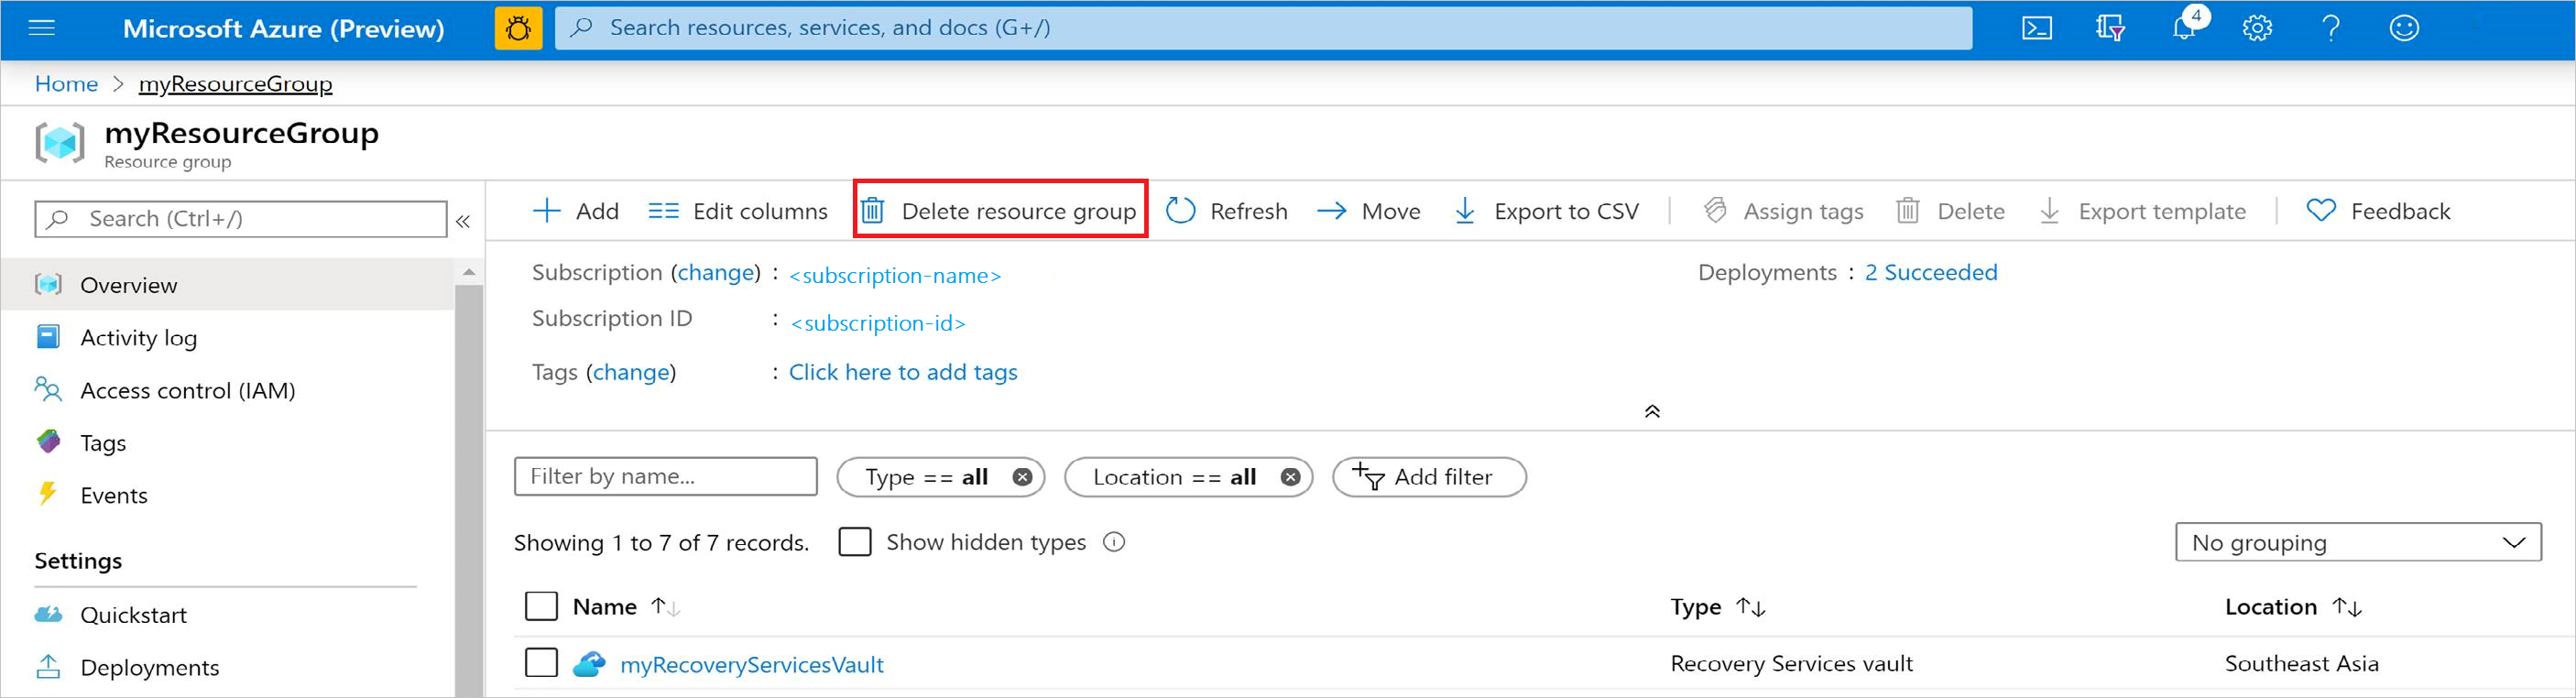 Screenshot showing to delete the resource group from the Azure portal.